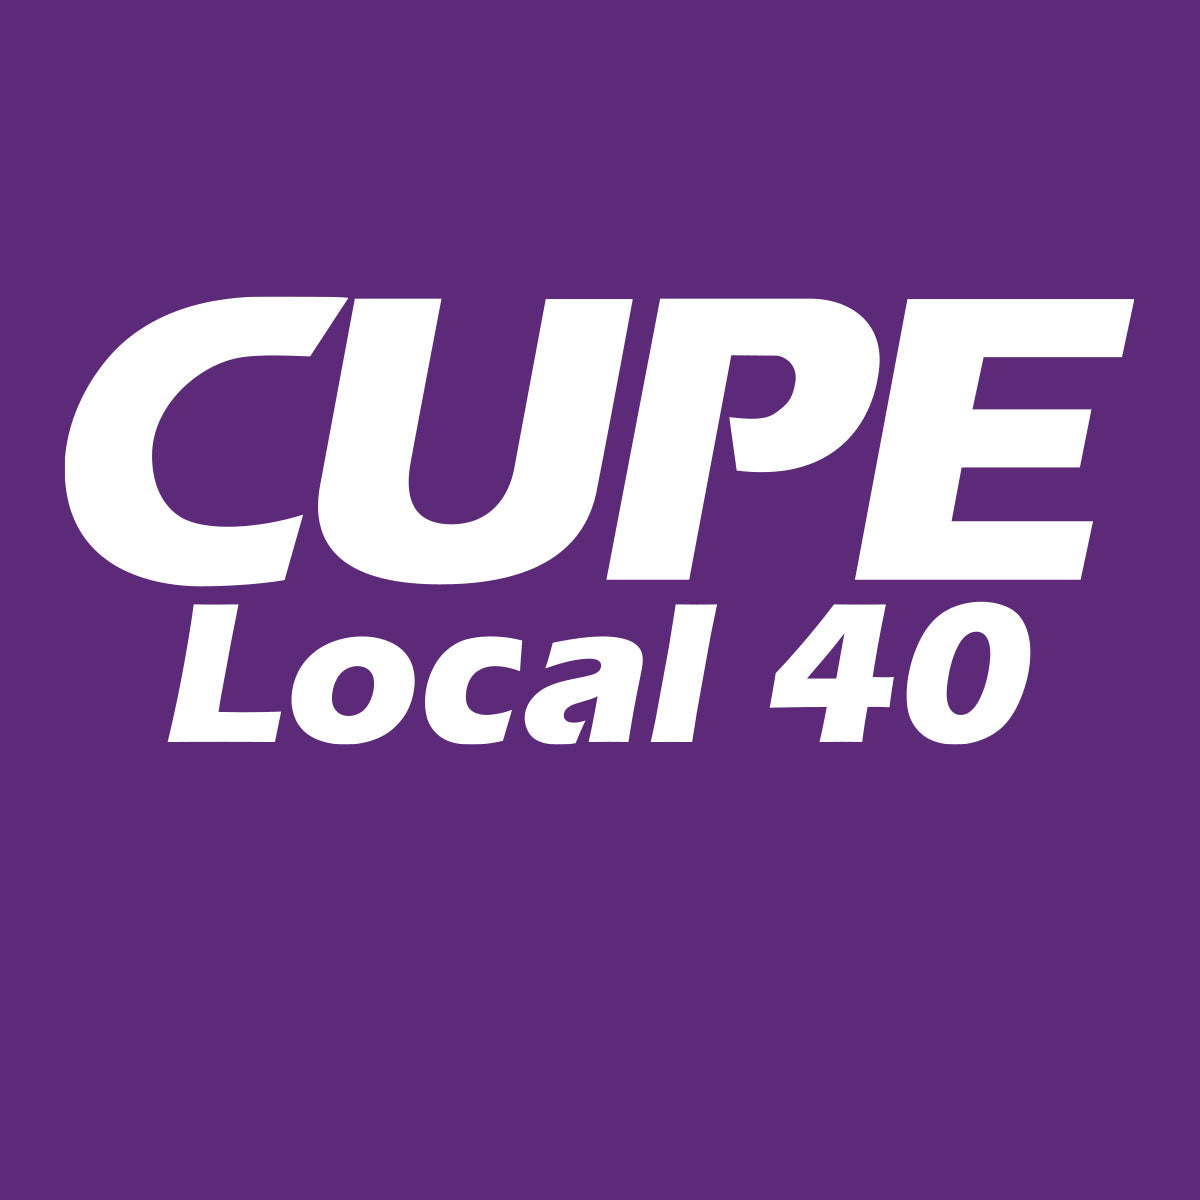 CUPE Local 40 Purple Pullover Hoodie